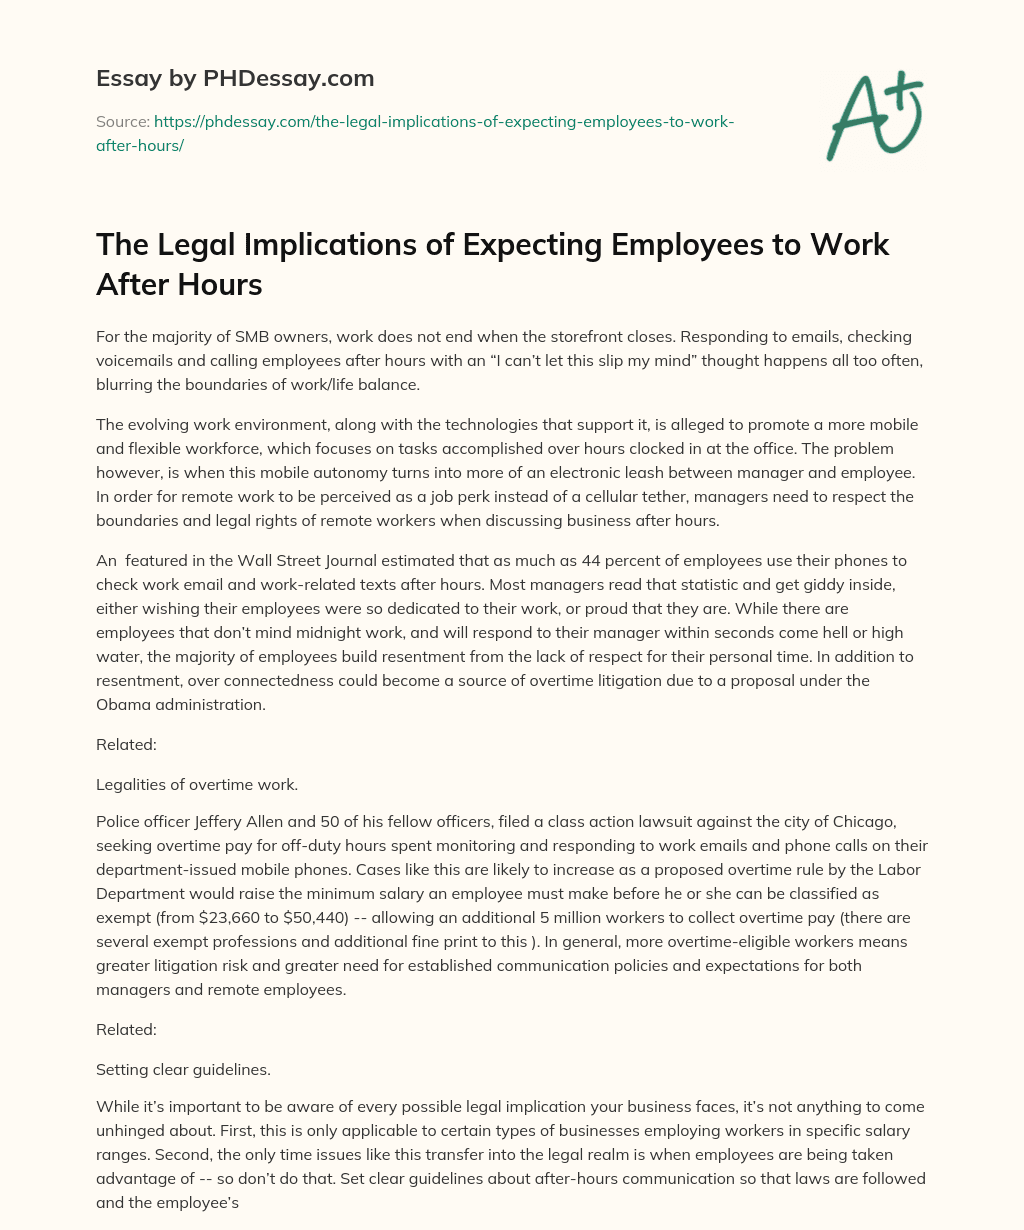 The Legal Implications of Expecting Employees to Work After Hours essay